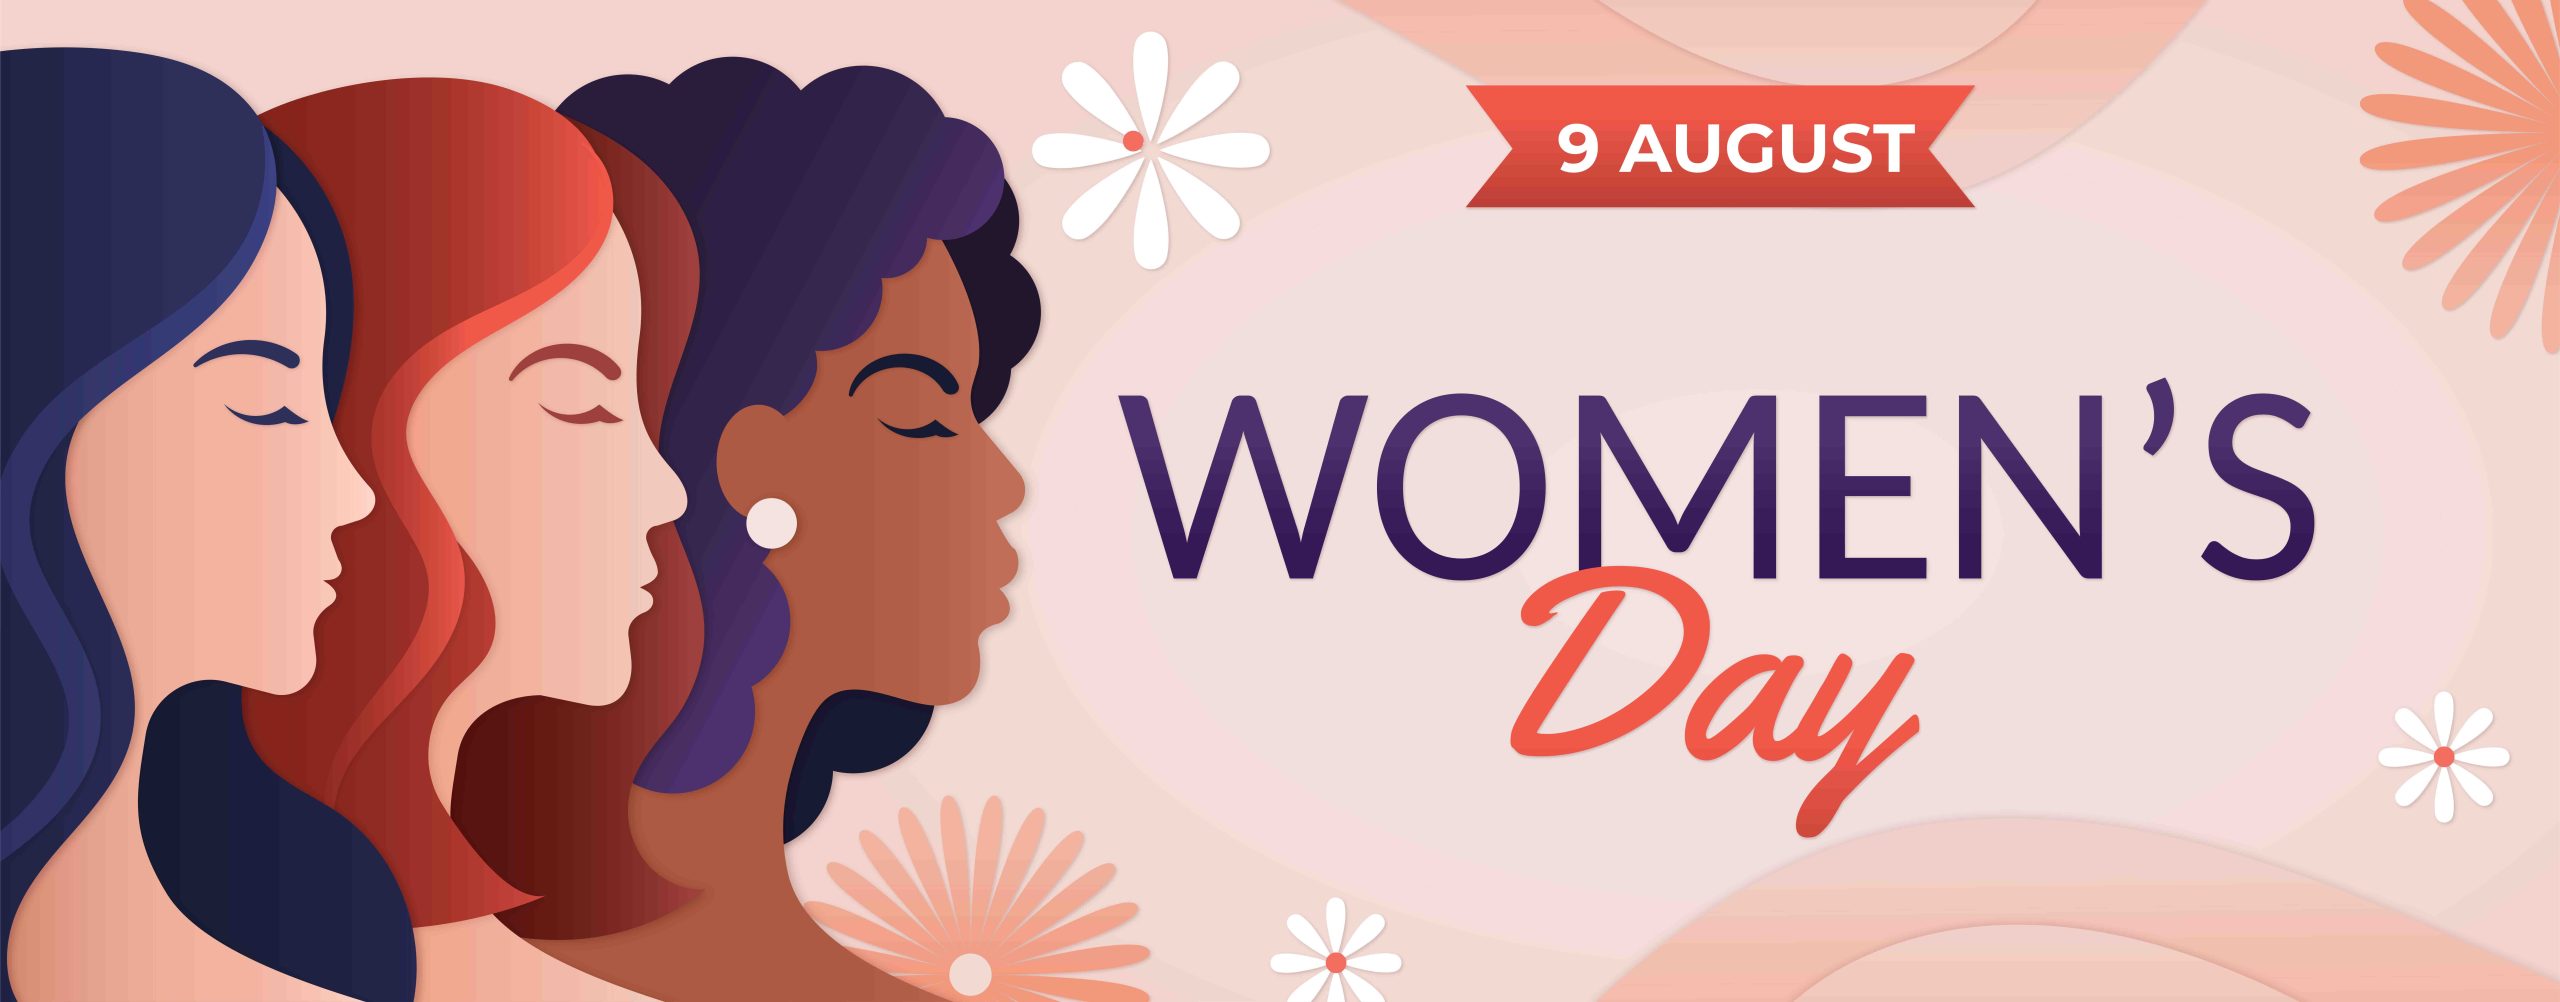 womans_day